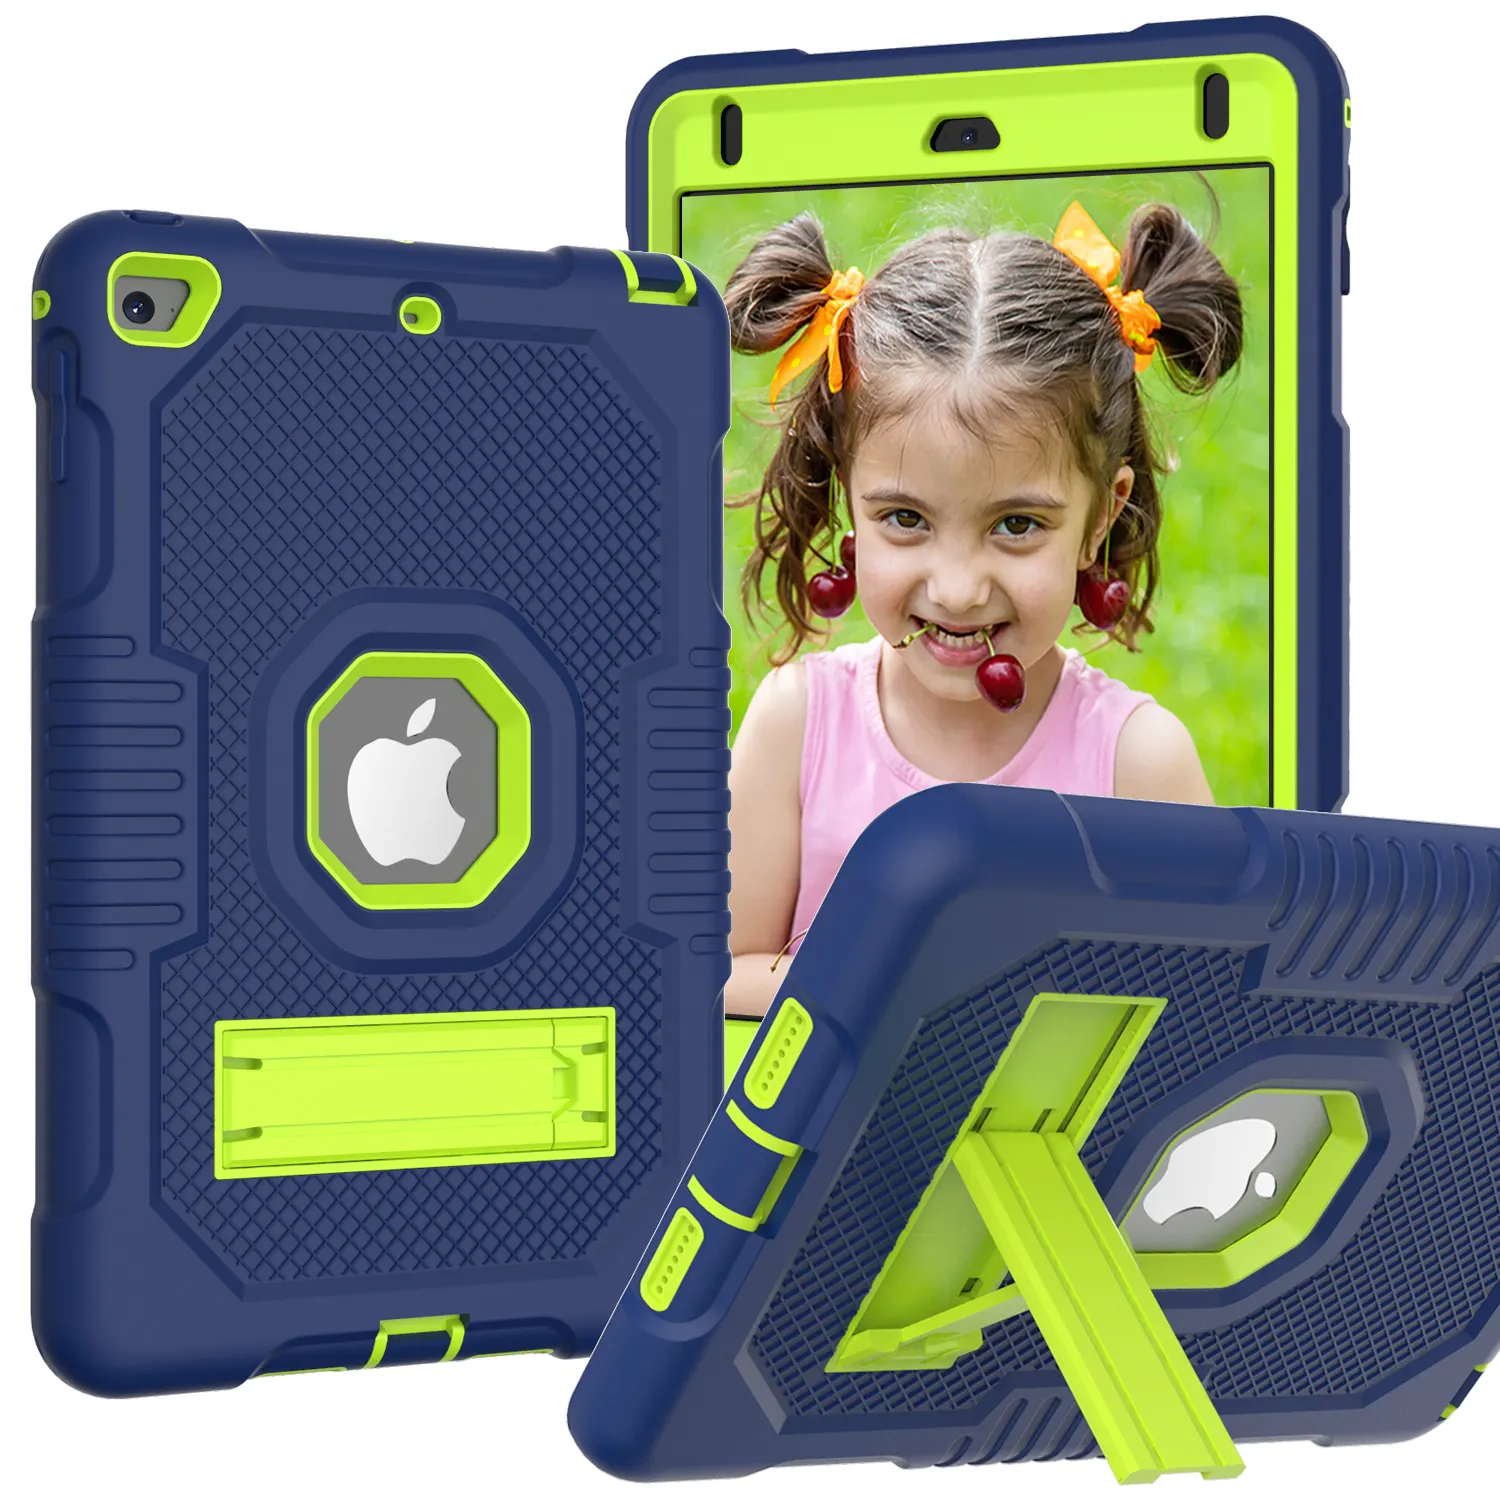 Heavy Duty Case For iPad Mini 4/ 5 7.9 zoll./5th Generation Kickstand Shockproof Defender Plastic + Silicone Tablet Cover